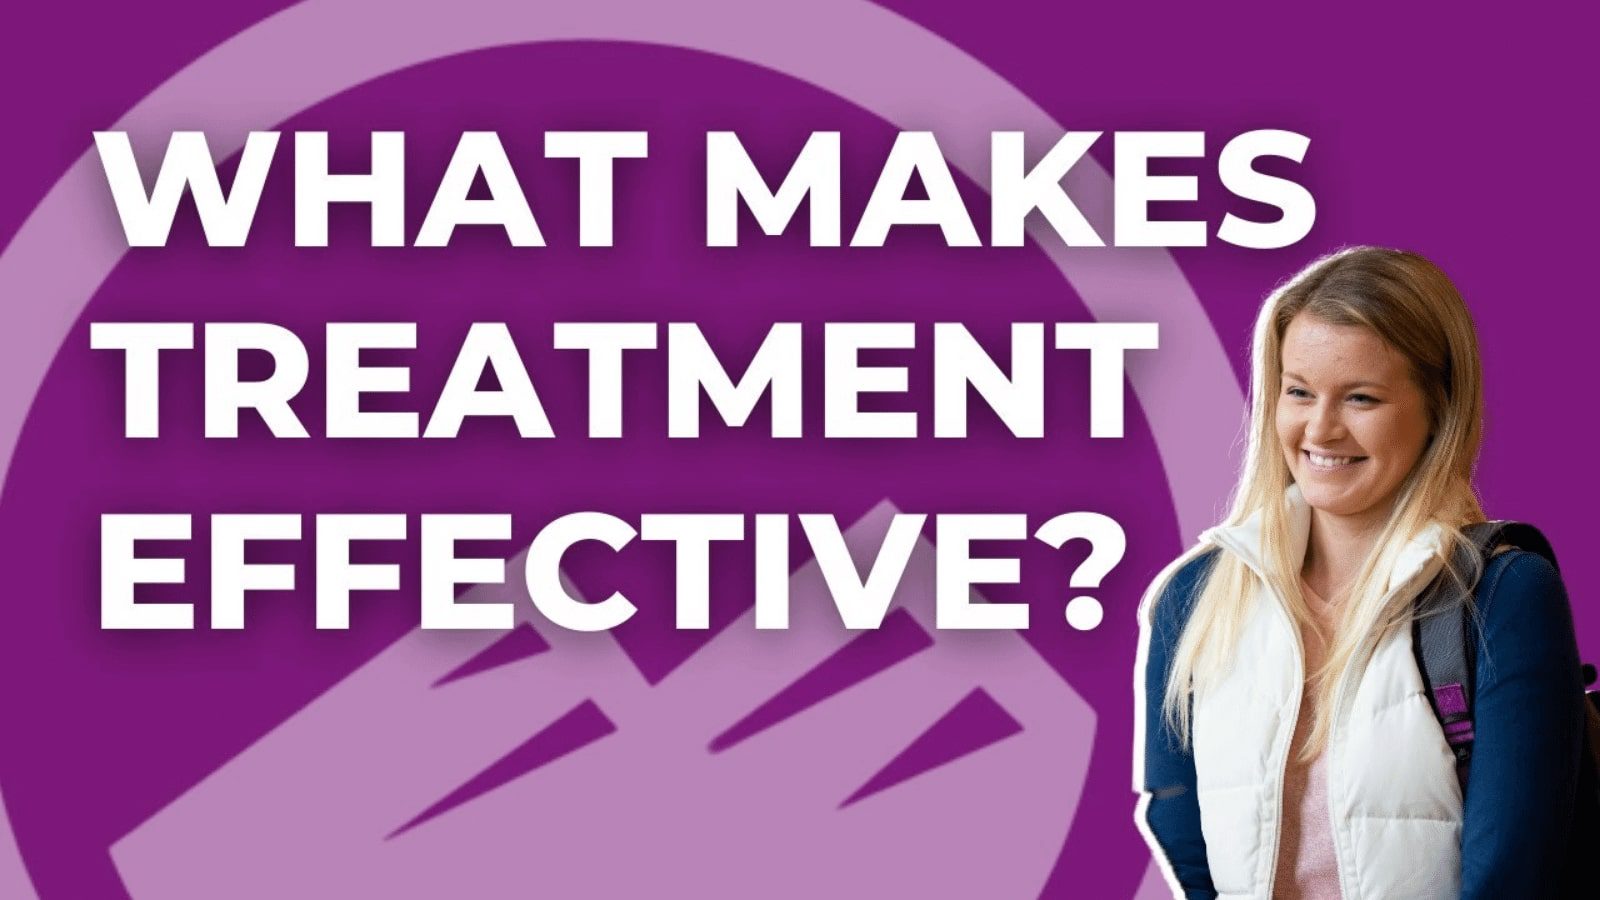 What makes treatment effective